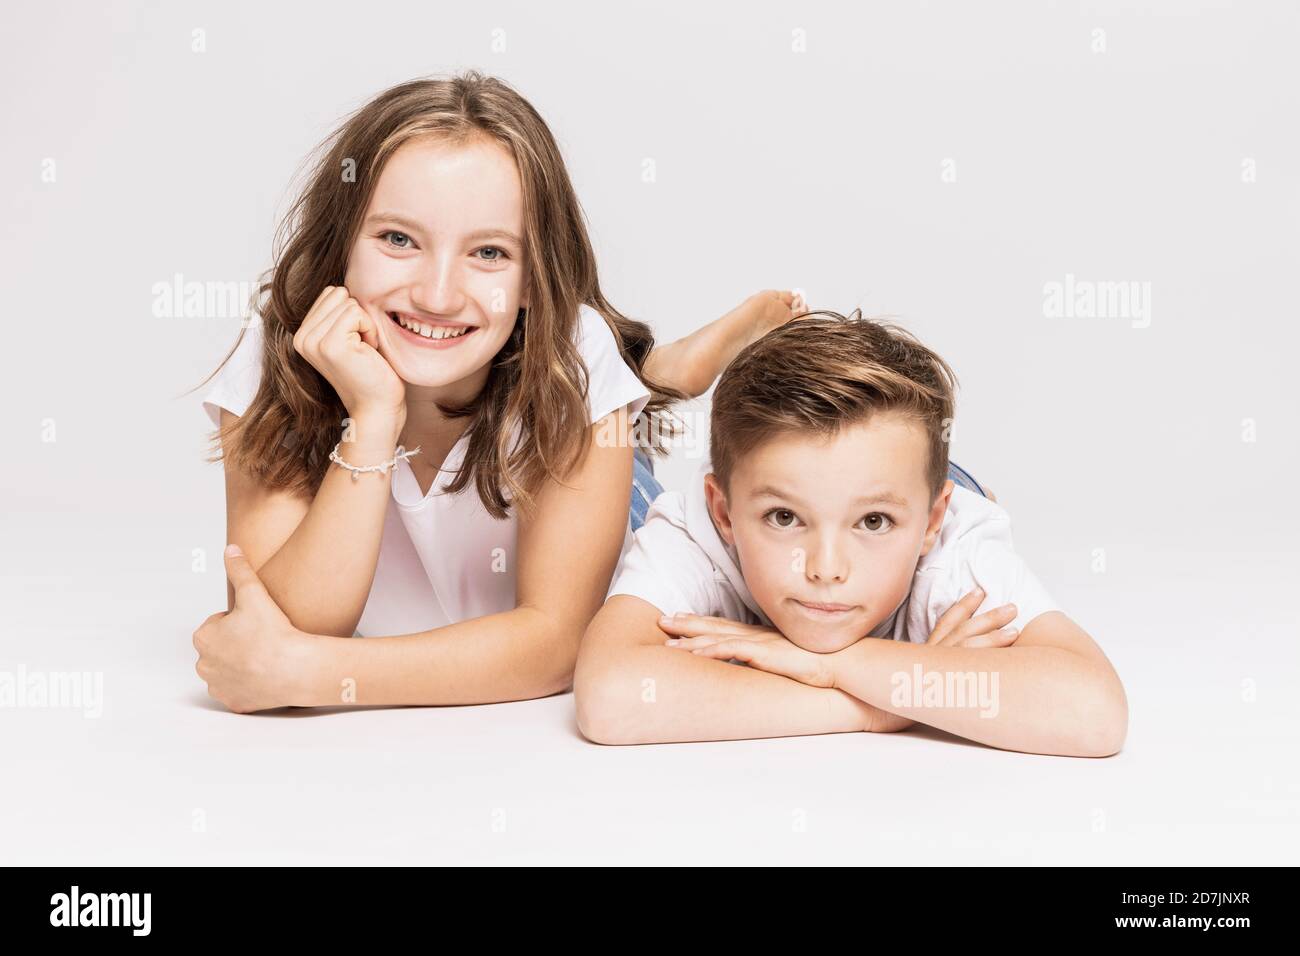 Cute siblings lying on white background Stock Photo